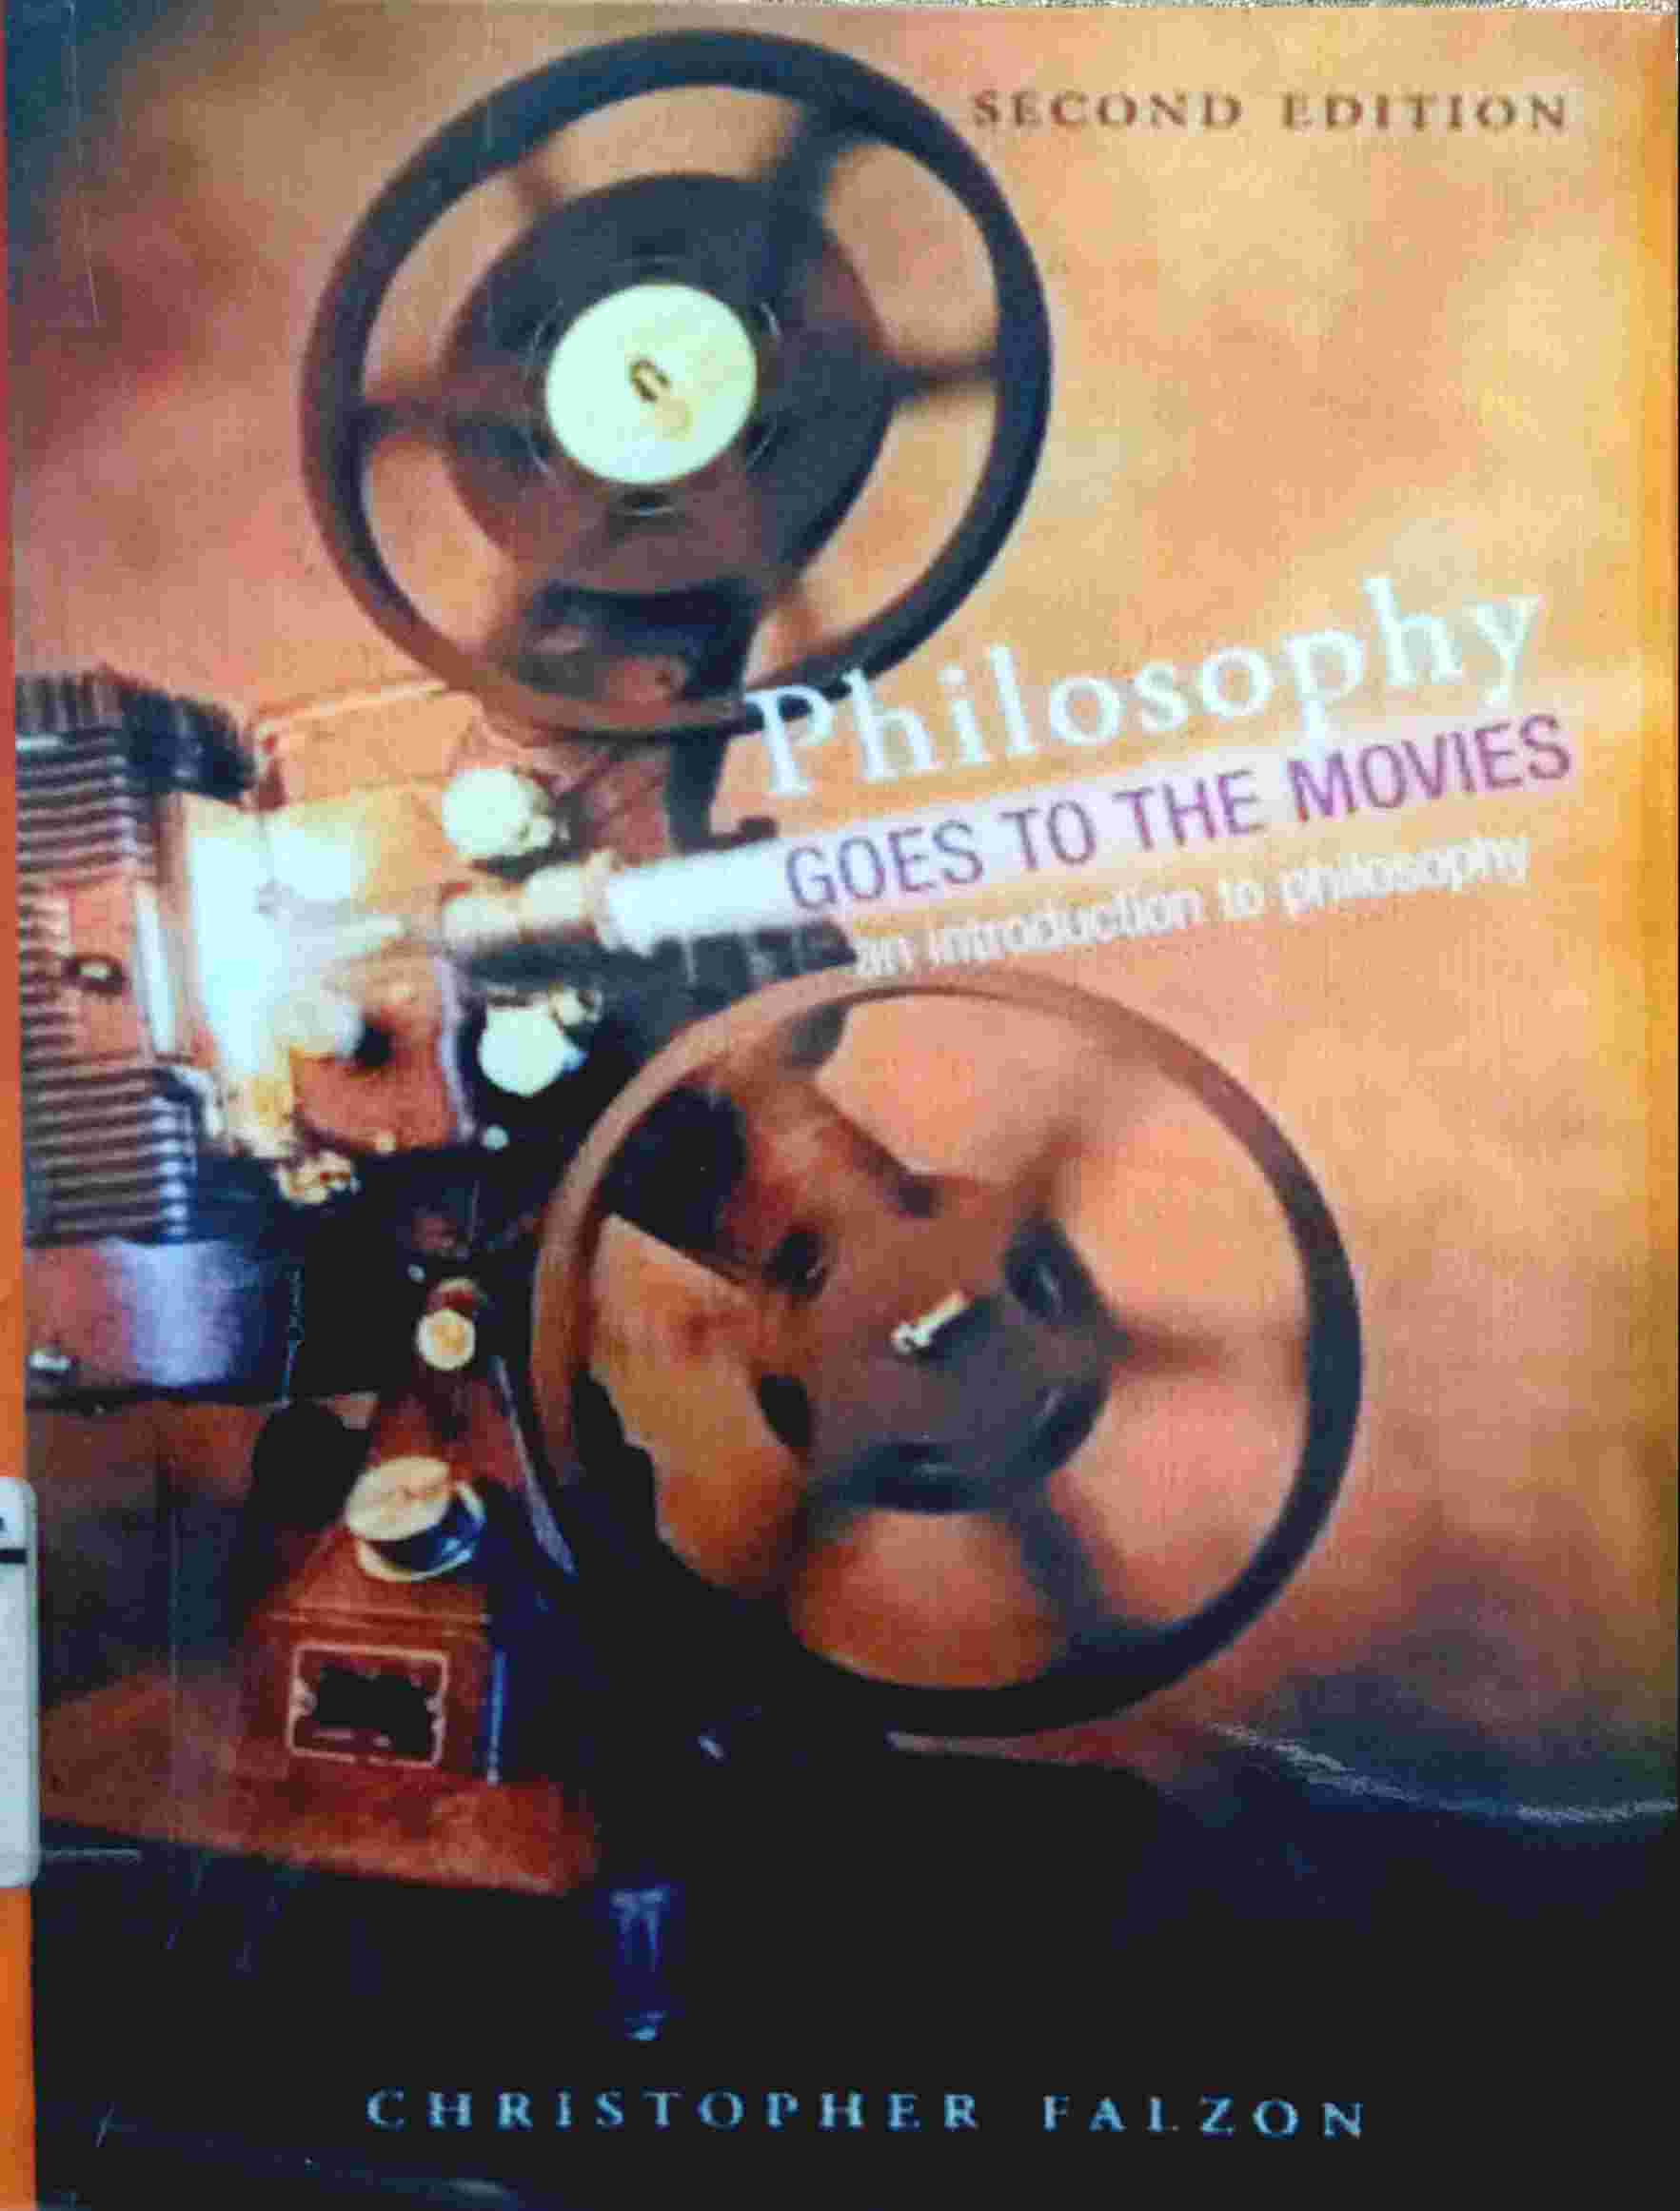 PHILOSOPHY GOES TO THE MOVIES - AN INTRODUCTION TO PHILOSOPHY